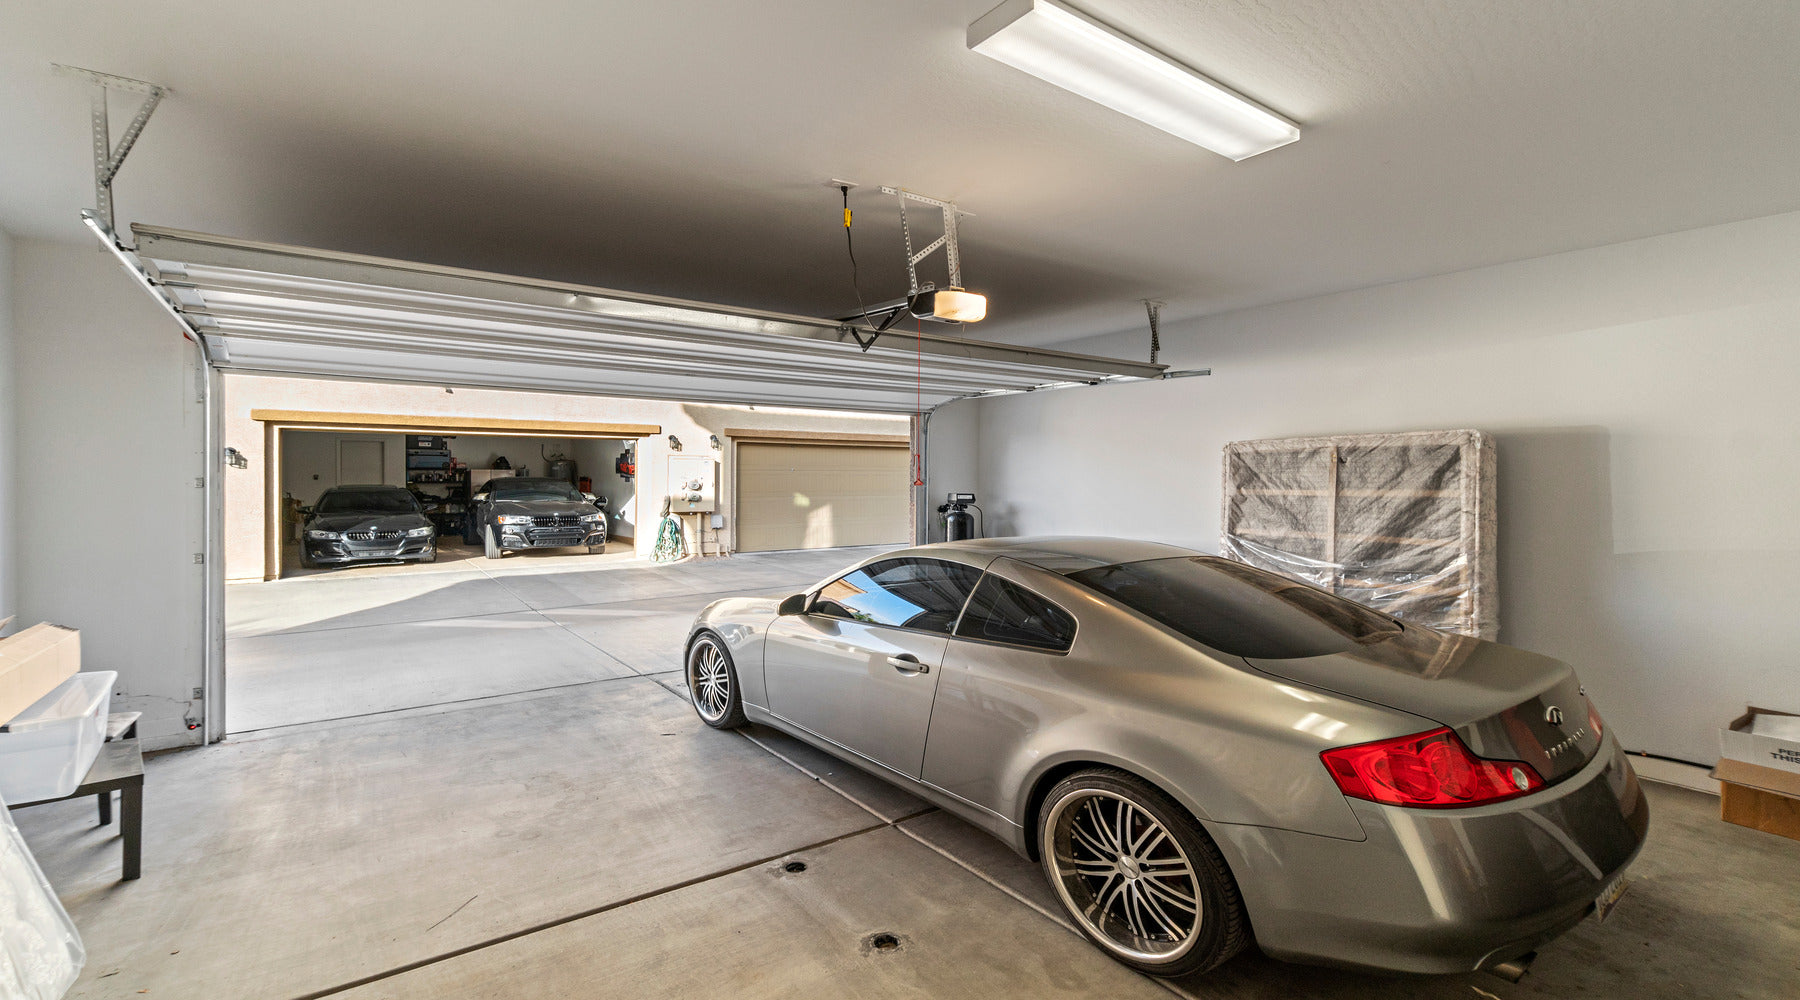 Wrap fixture shown installed in home garage above car